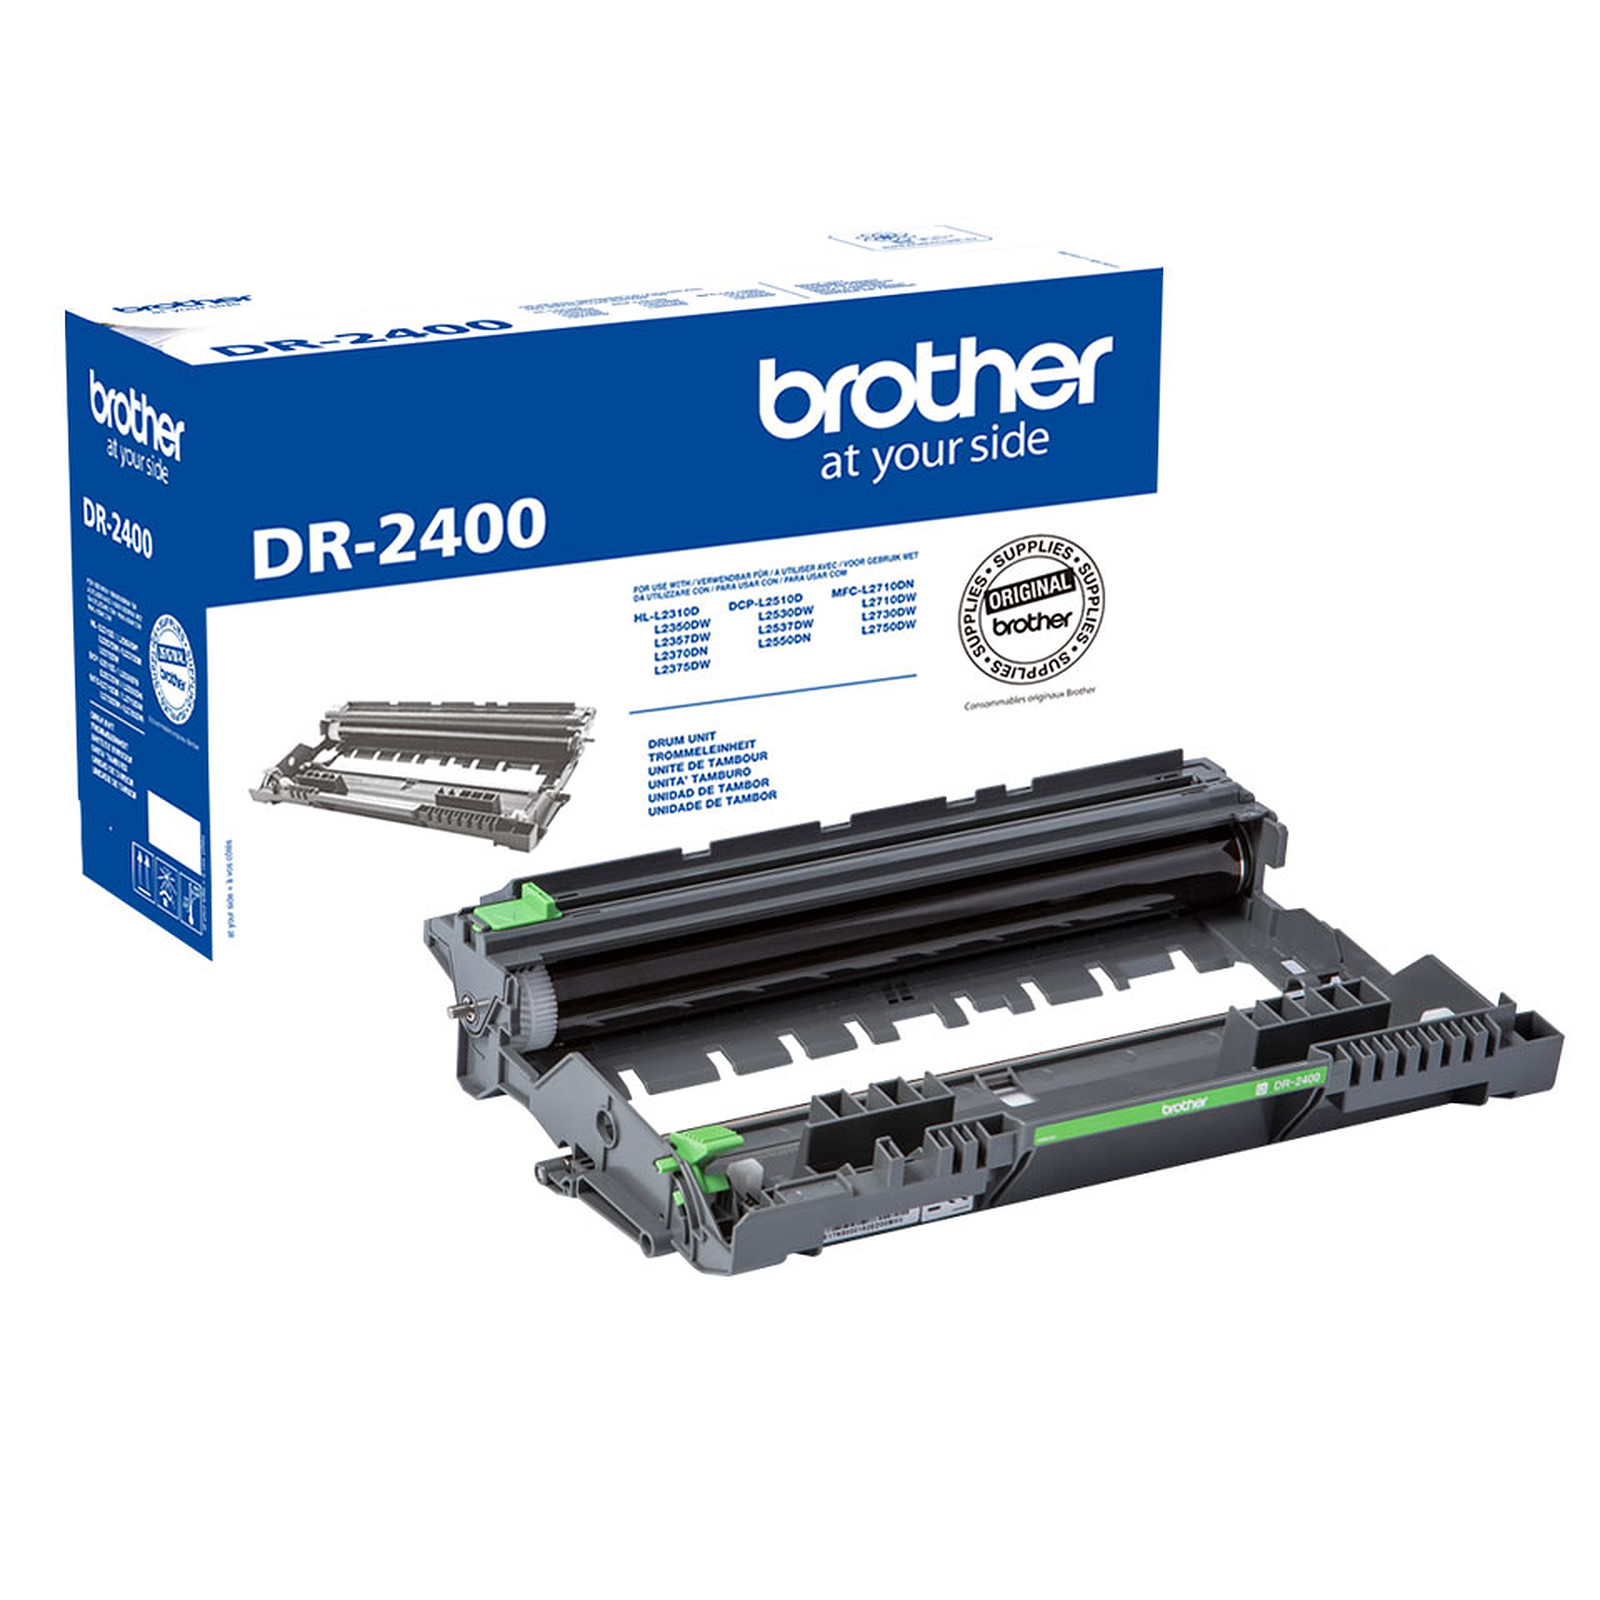 Brother DR-2400 · Occasion - Toner imprimante Brother - Occasion